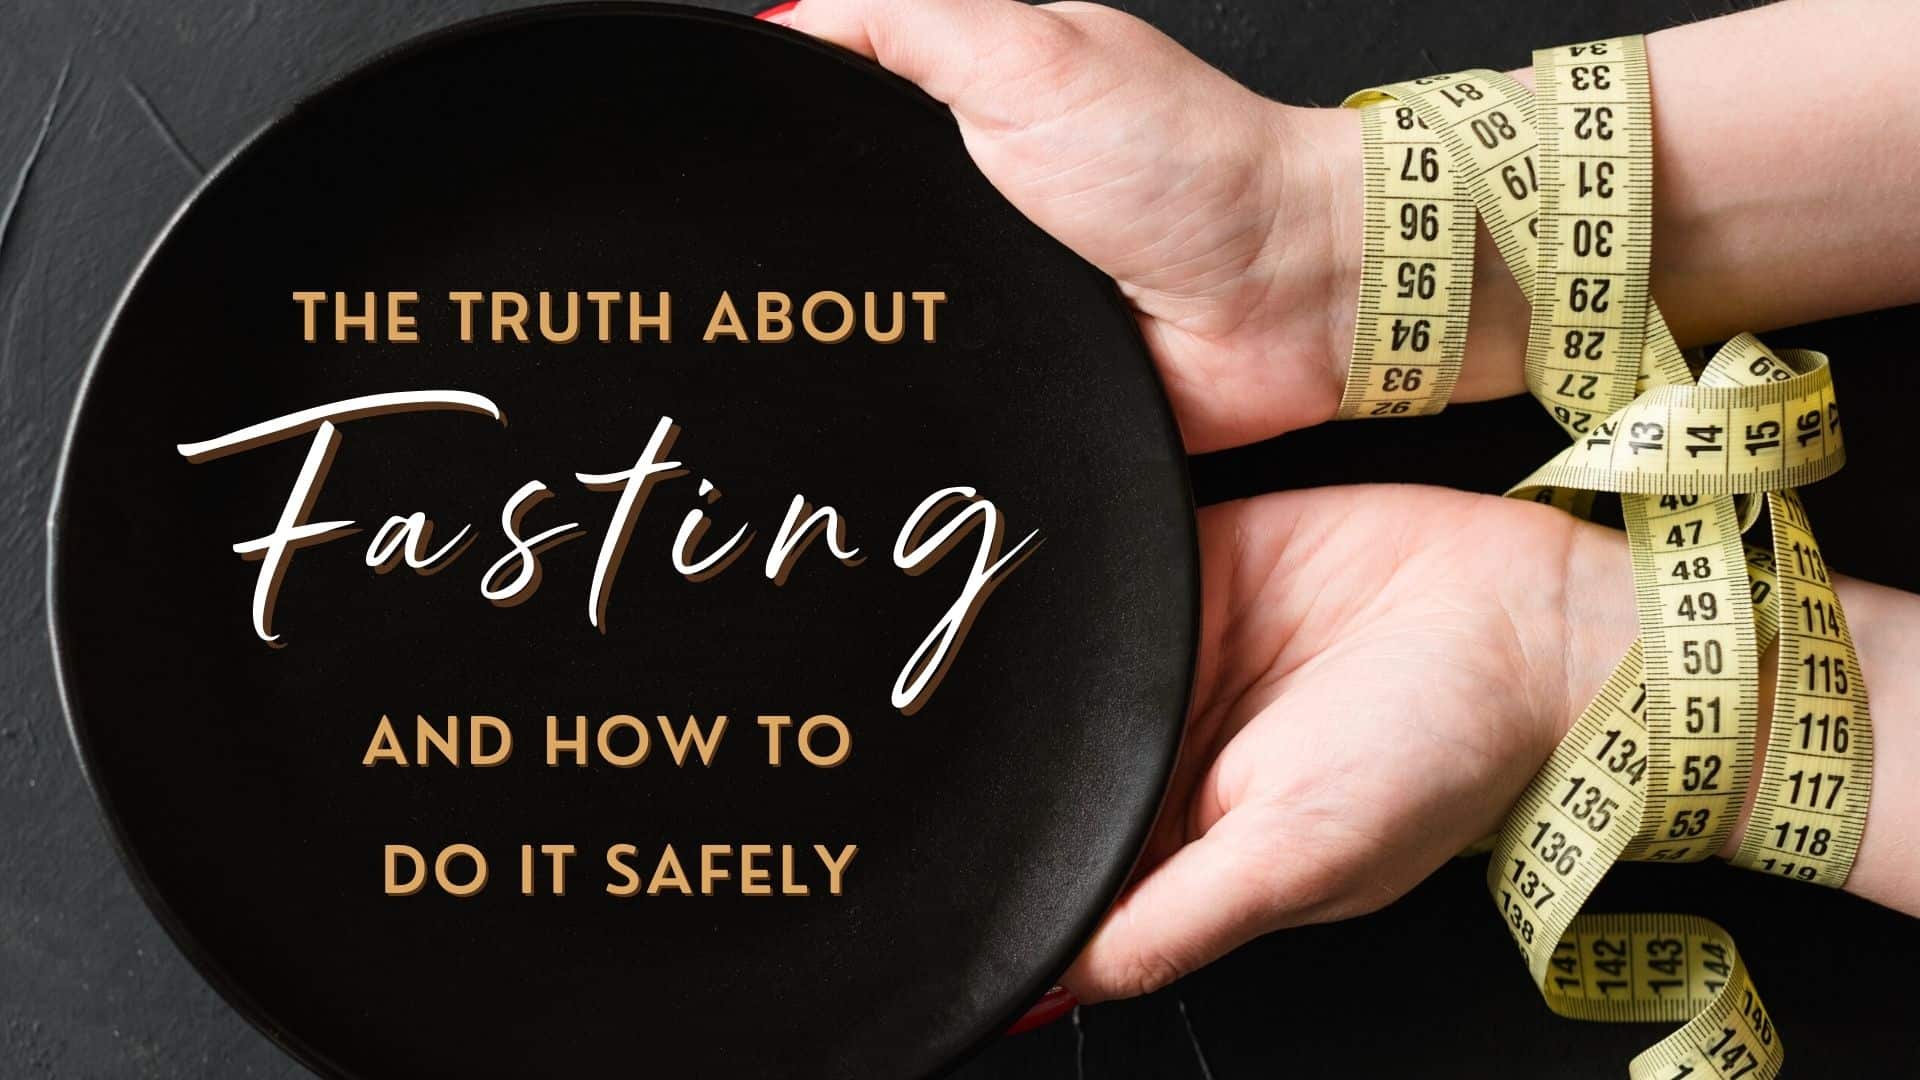 The Truth About Fasting And How To Do It Safely